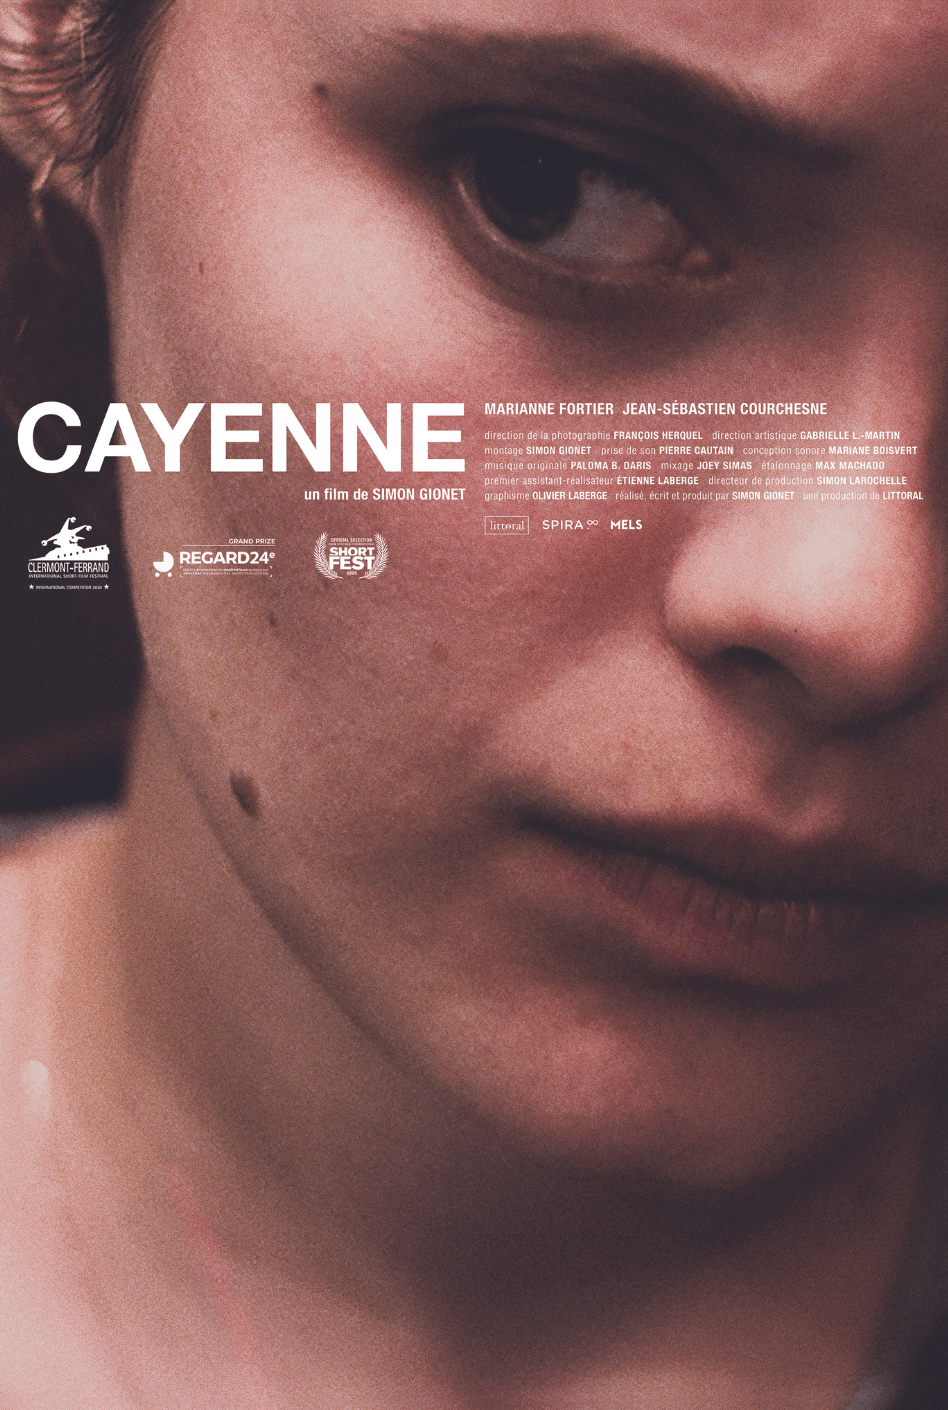 images/bottin_films/07ce0850a11348706b7044f54ec1a997-cayenne-affiche-site-web-spira.png#joomlaImage://local-images/bottin_films/07ce0850a11348706b7044f54ec1a997-cayenne-affiche-site-web-spira.png?width=948&height=1410